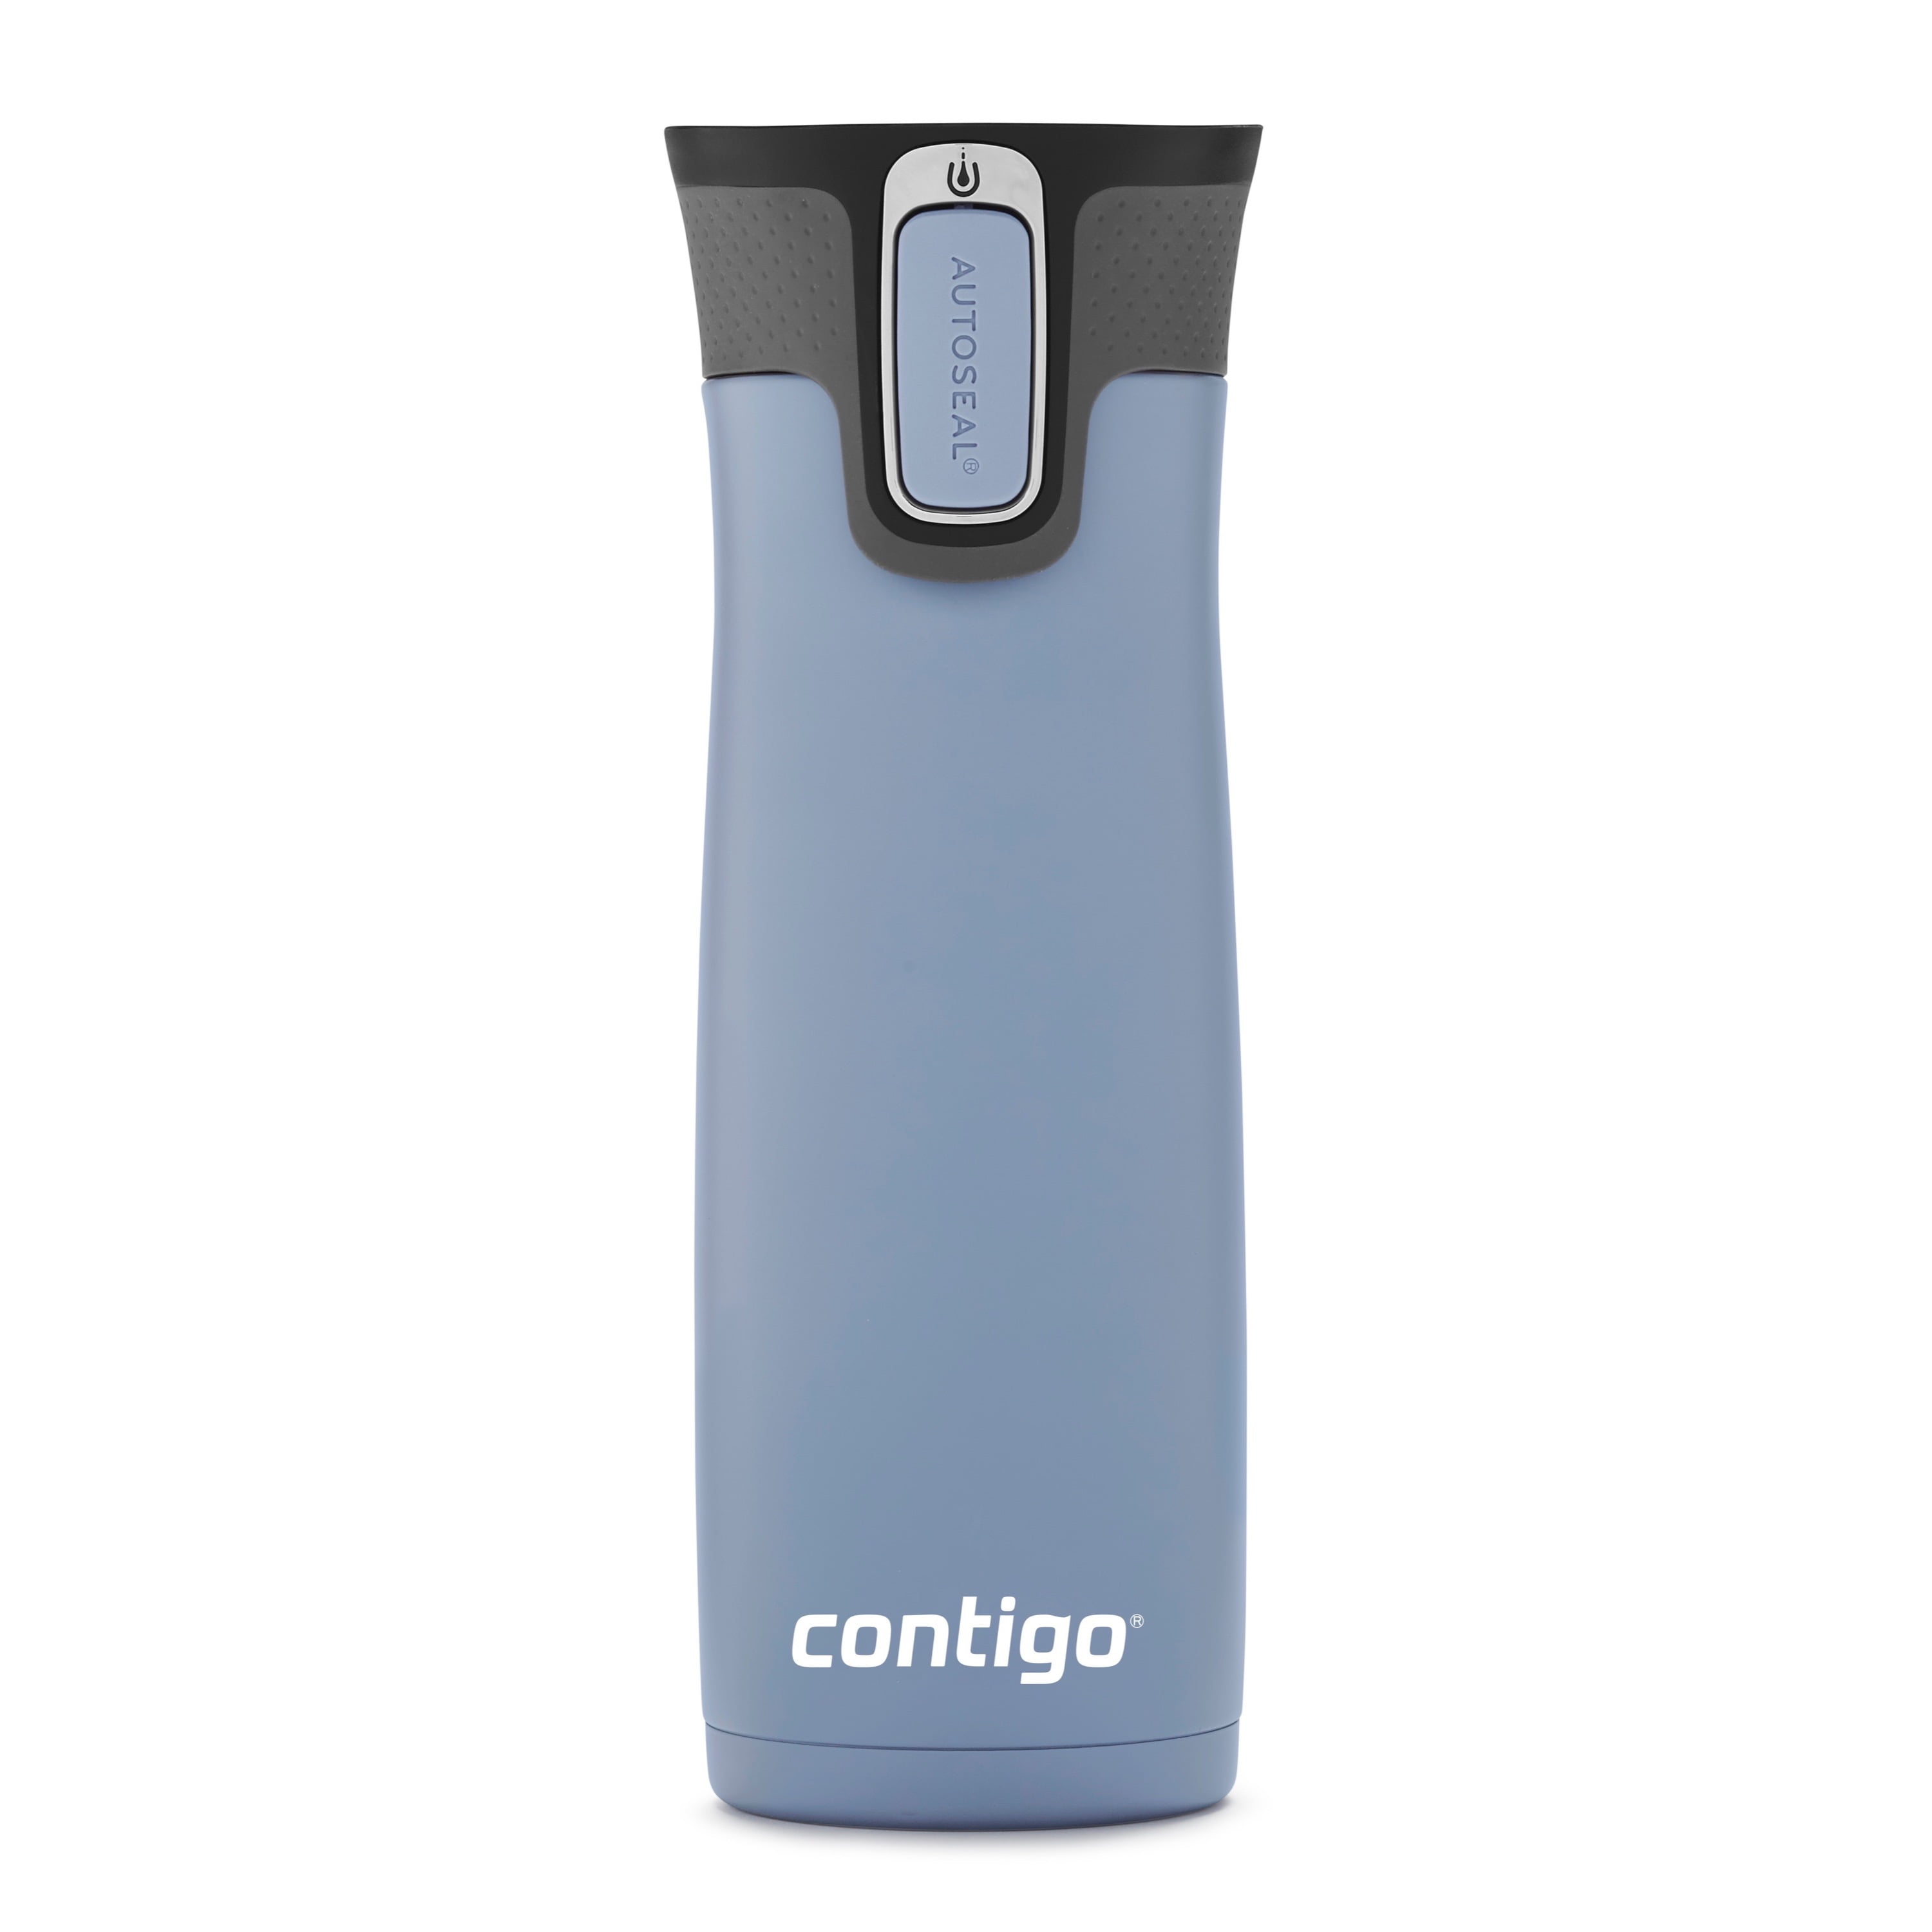  Contigo Huron Vacuum-Insulated Stainless Steel Travel Mug with  Leak-Proof Lid, Keeps Drinks Hot or Cold for Hours, Fits Most Cup Holders  and Brewers, 20oz 2-Pack, Blue Corn & Bubble Tea 